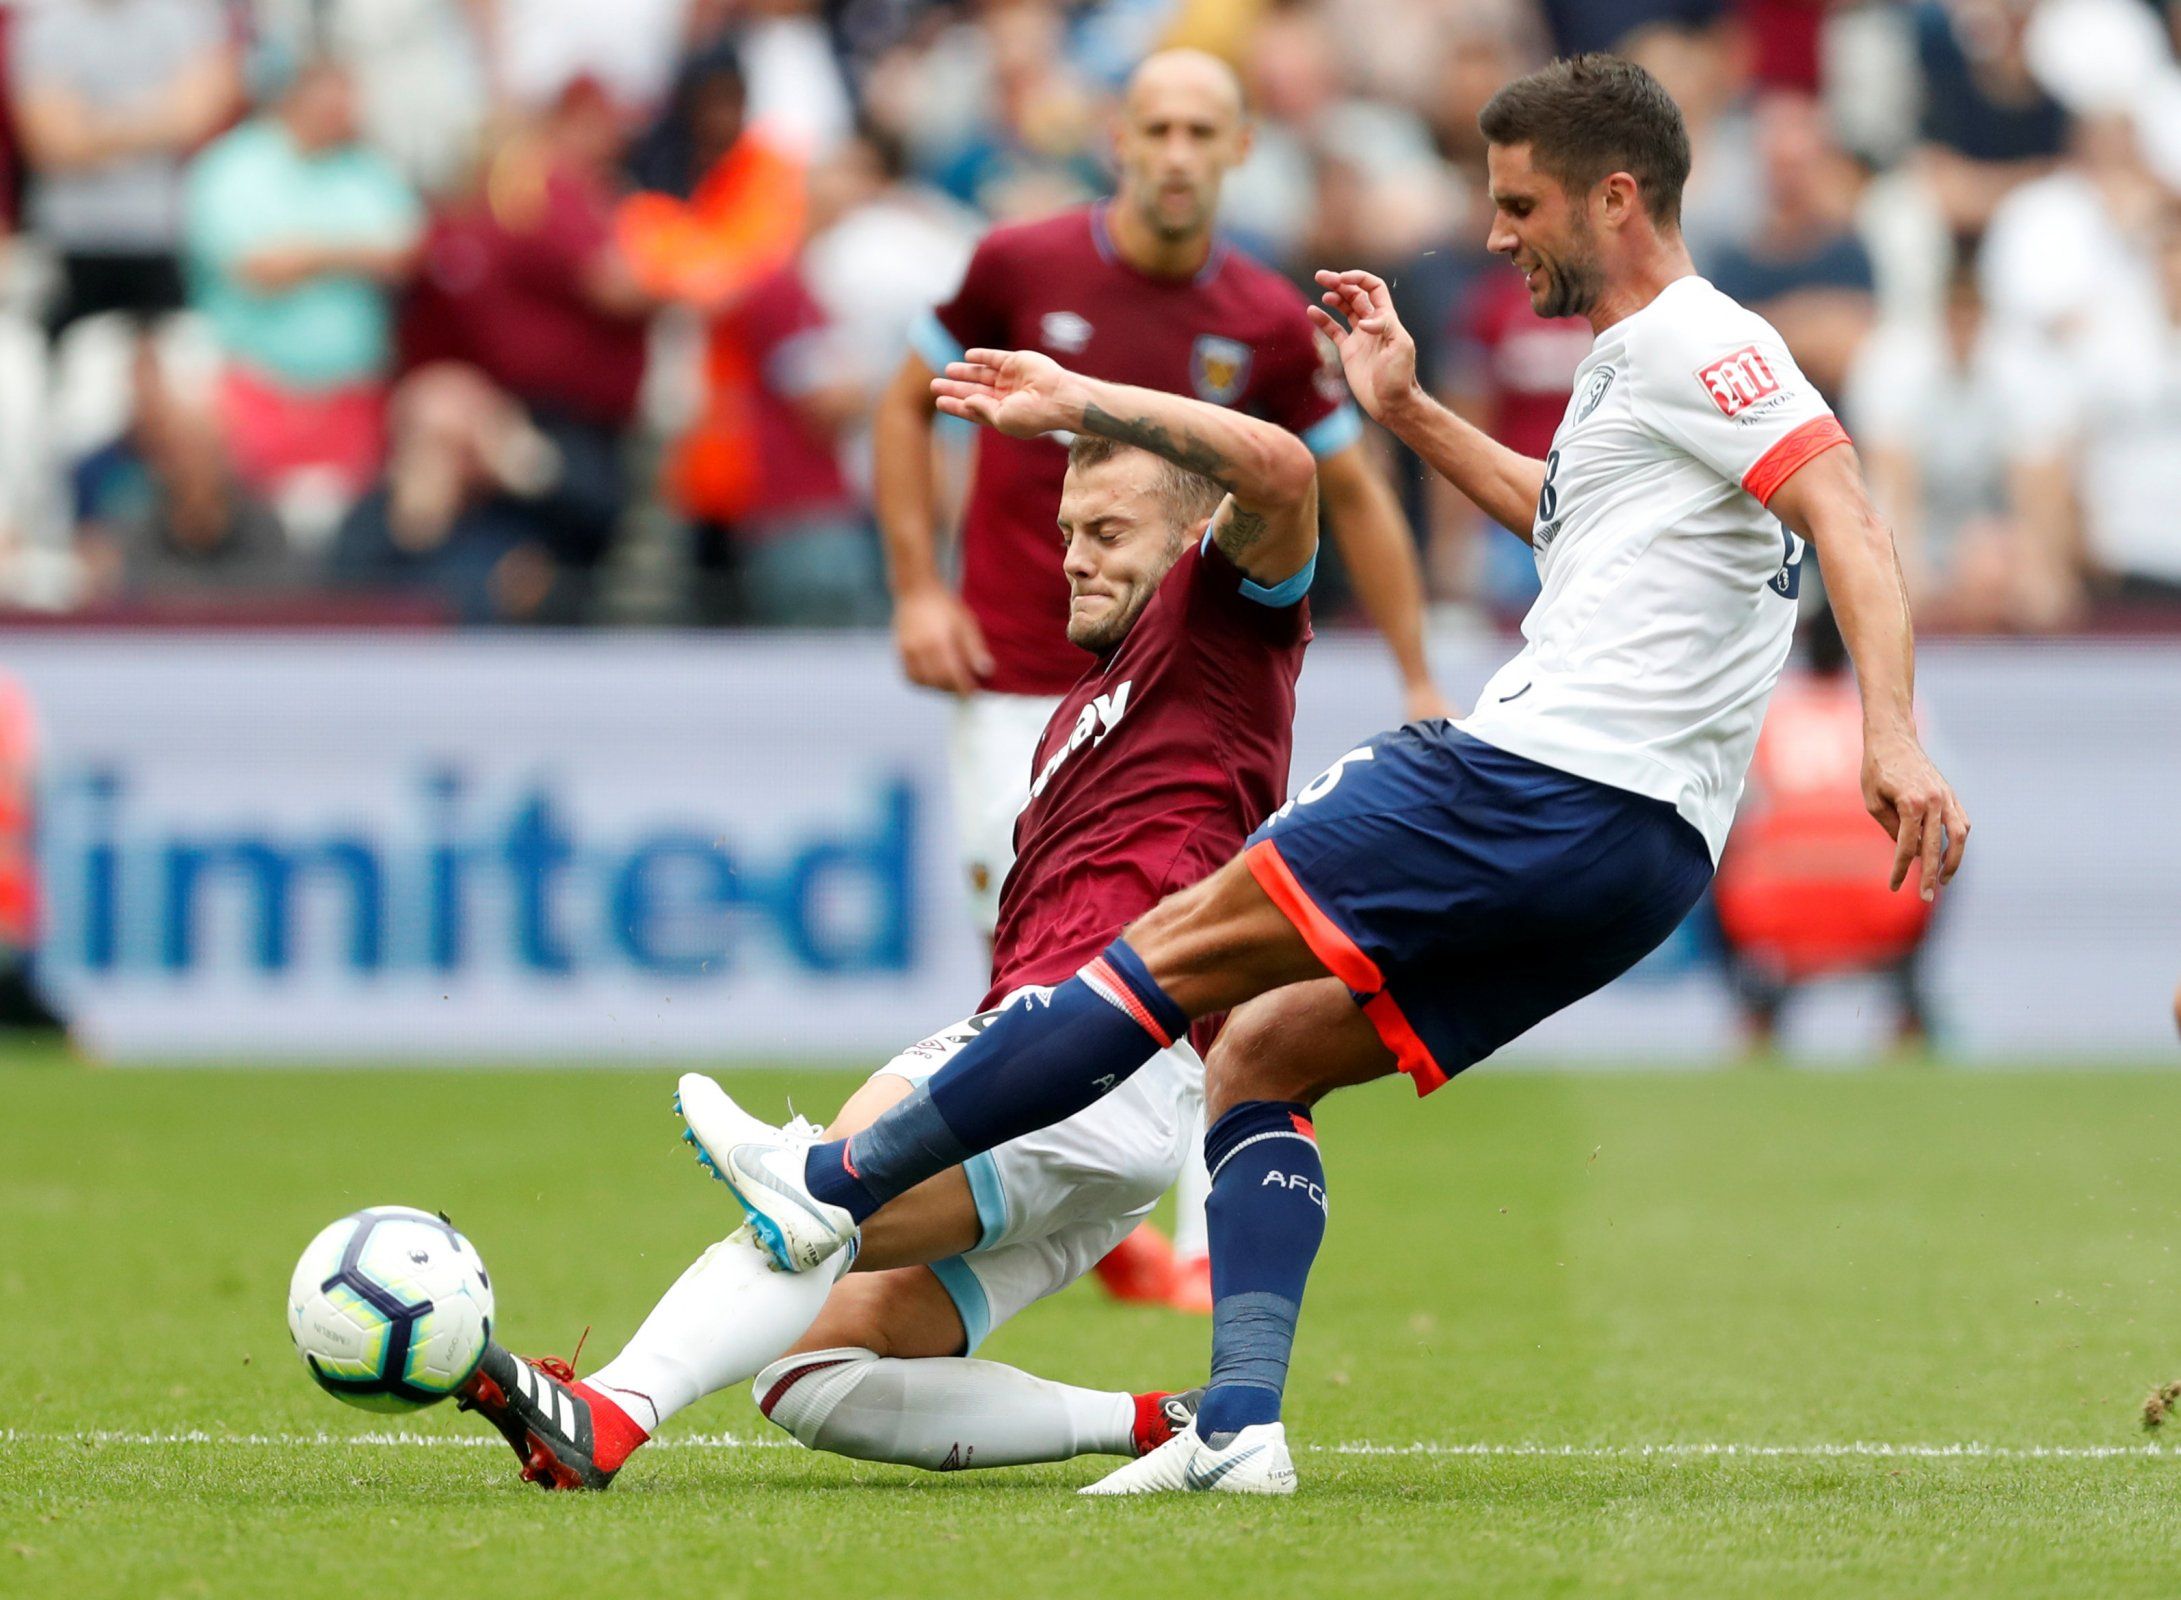 Jack Wilshere tackles Bournemouth's Andrew Surman